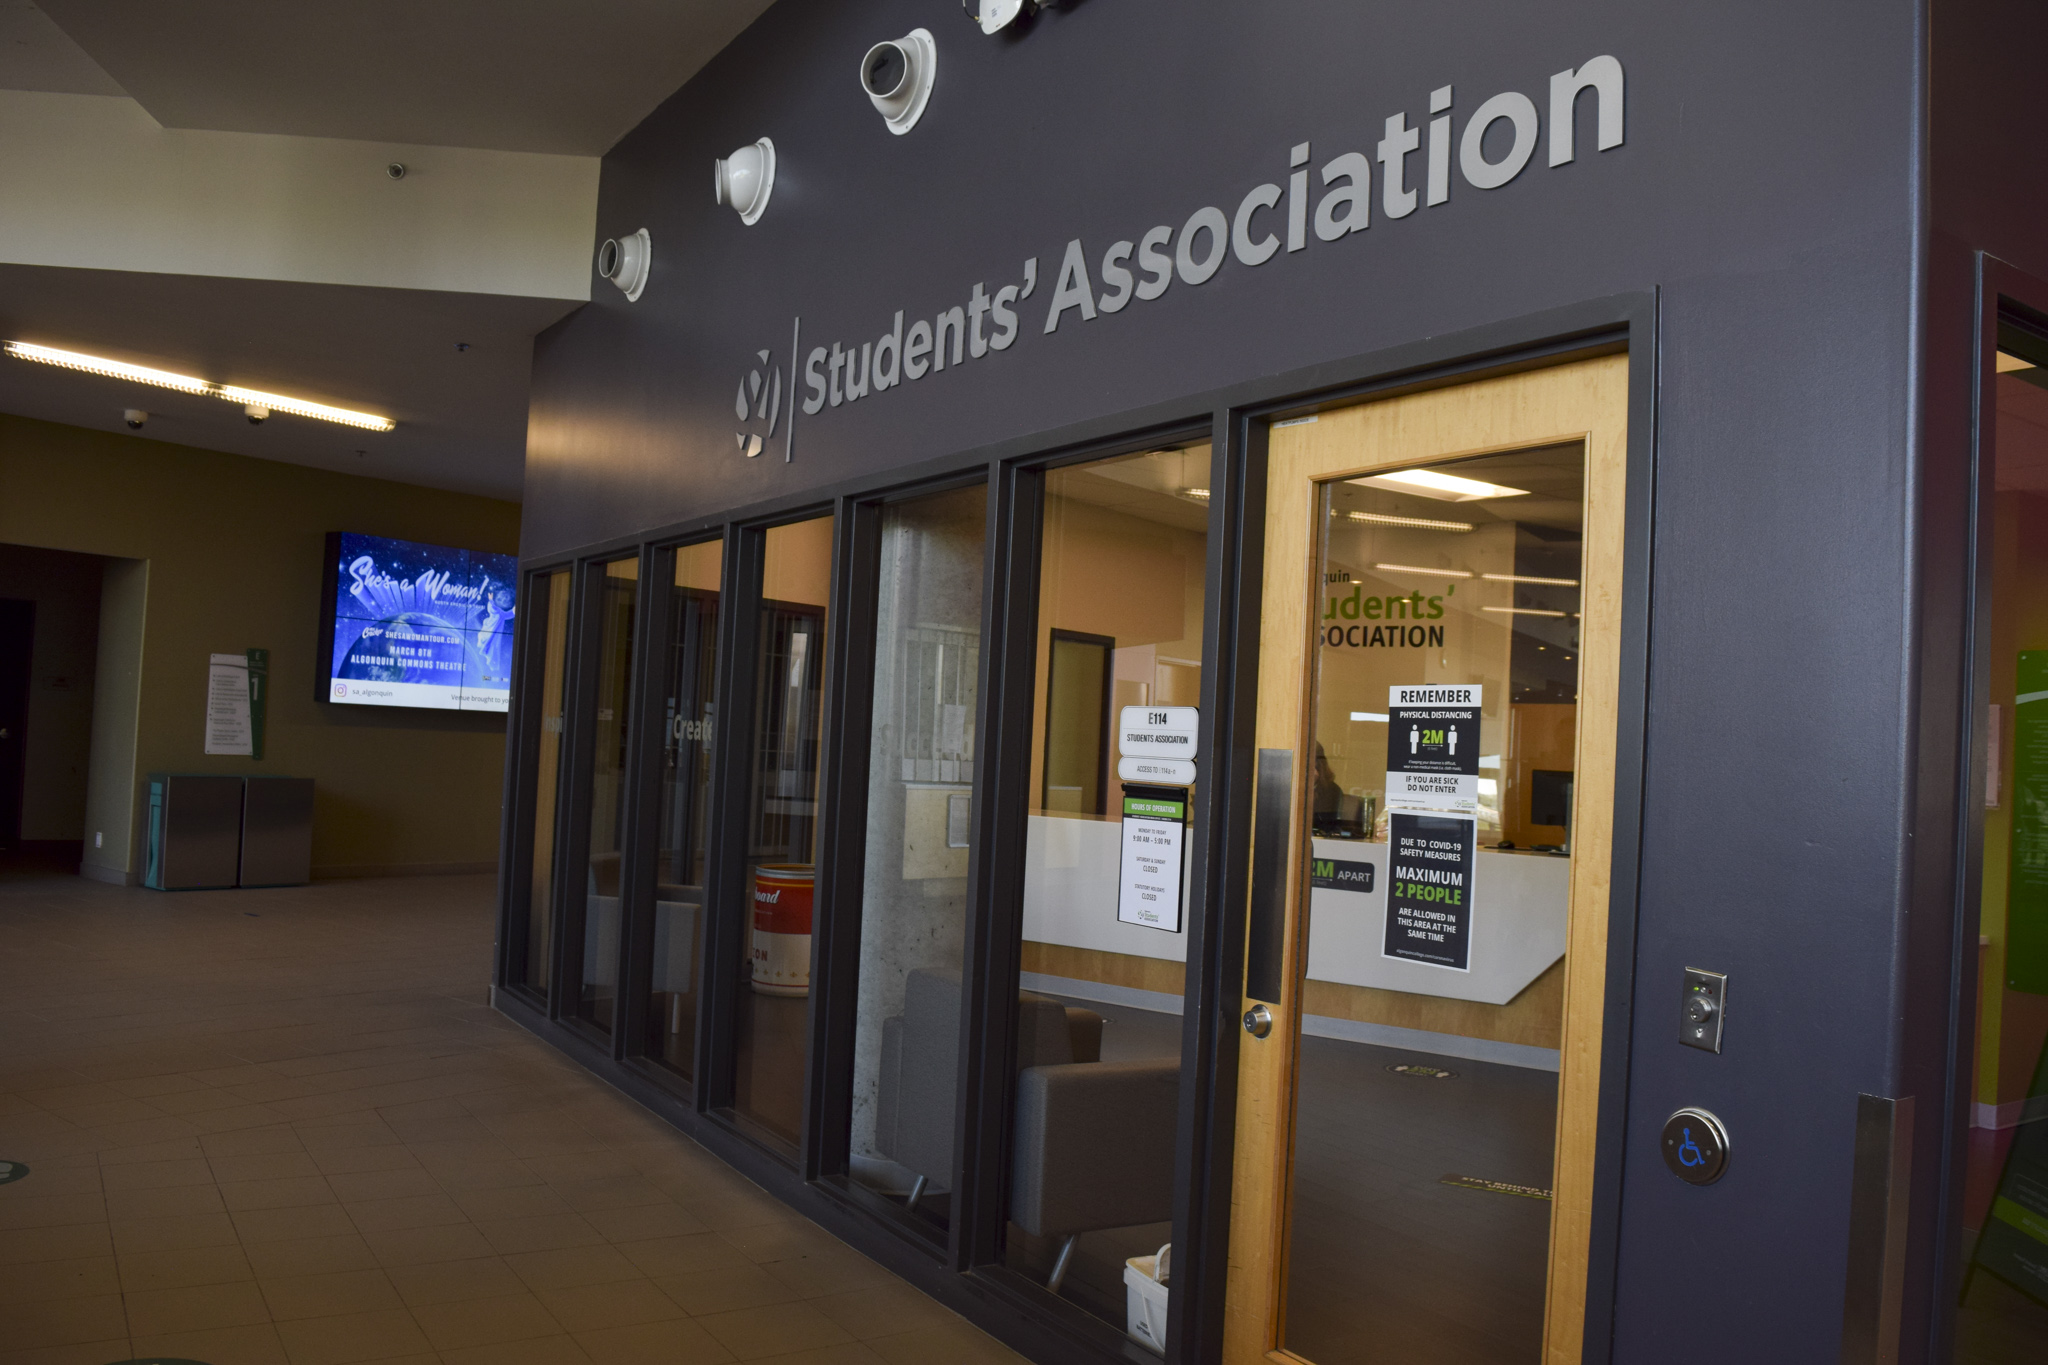 Students' Association office at Woodroffe campus.